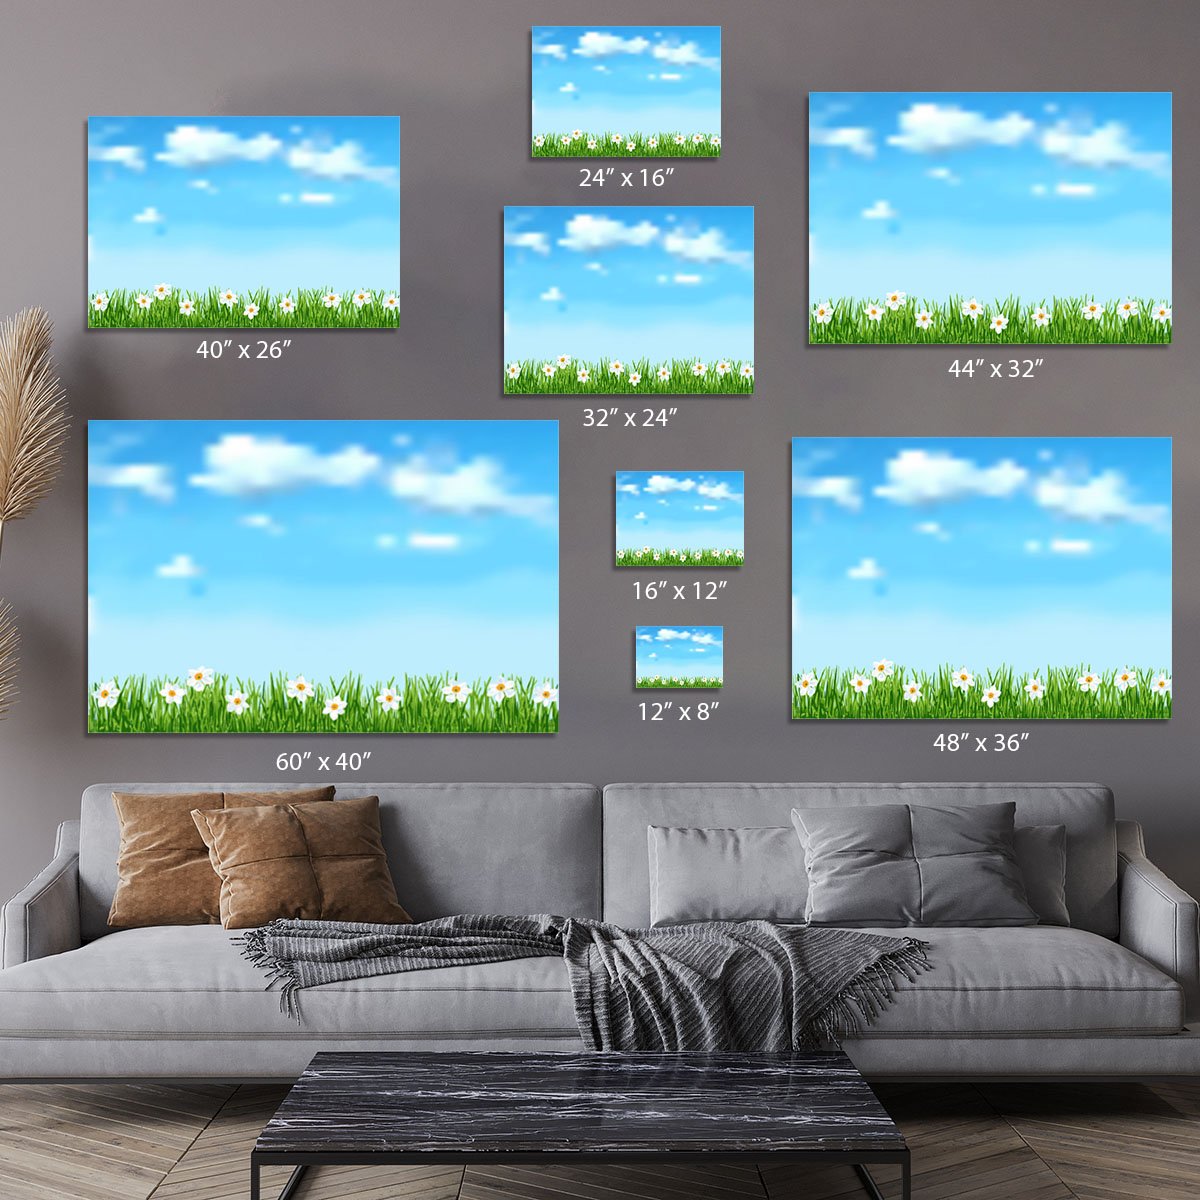 Background with grass and white flowers Canvas Print or Poster